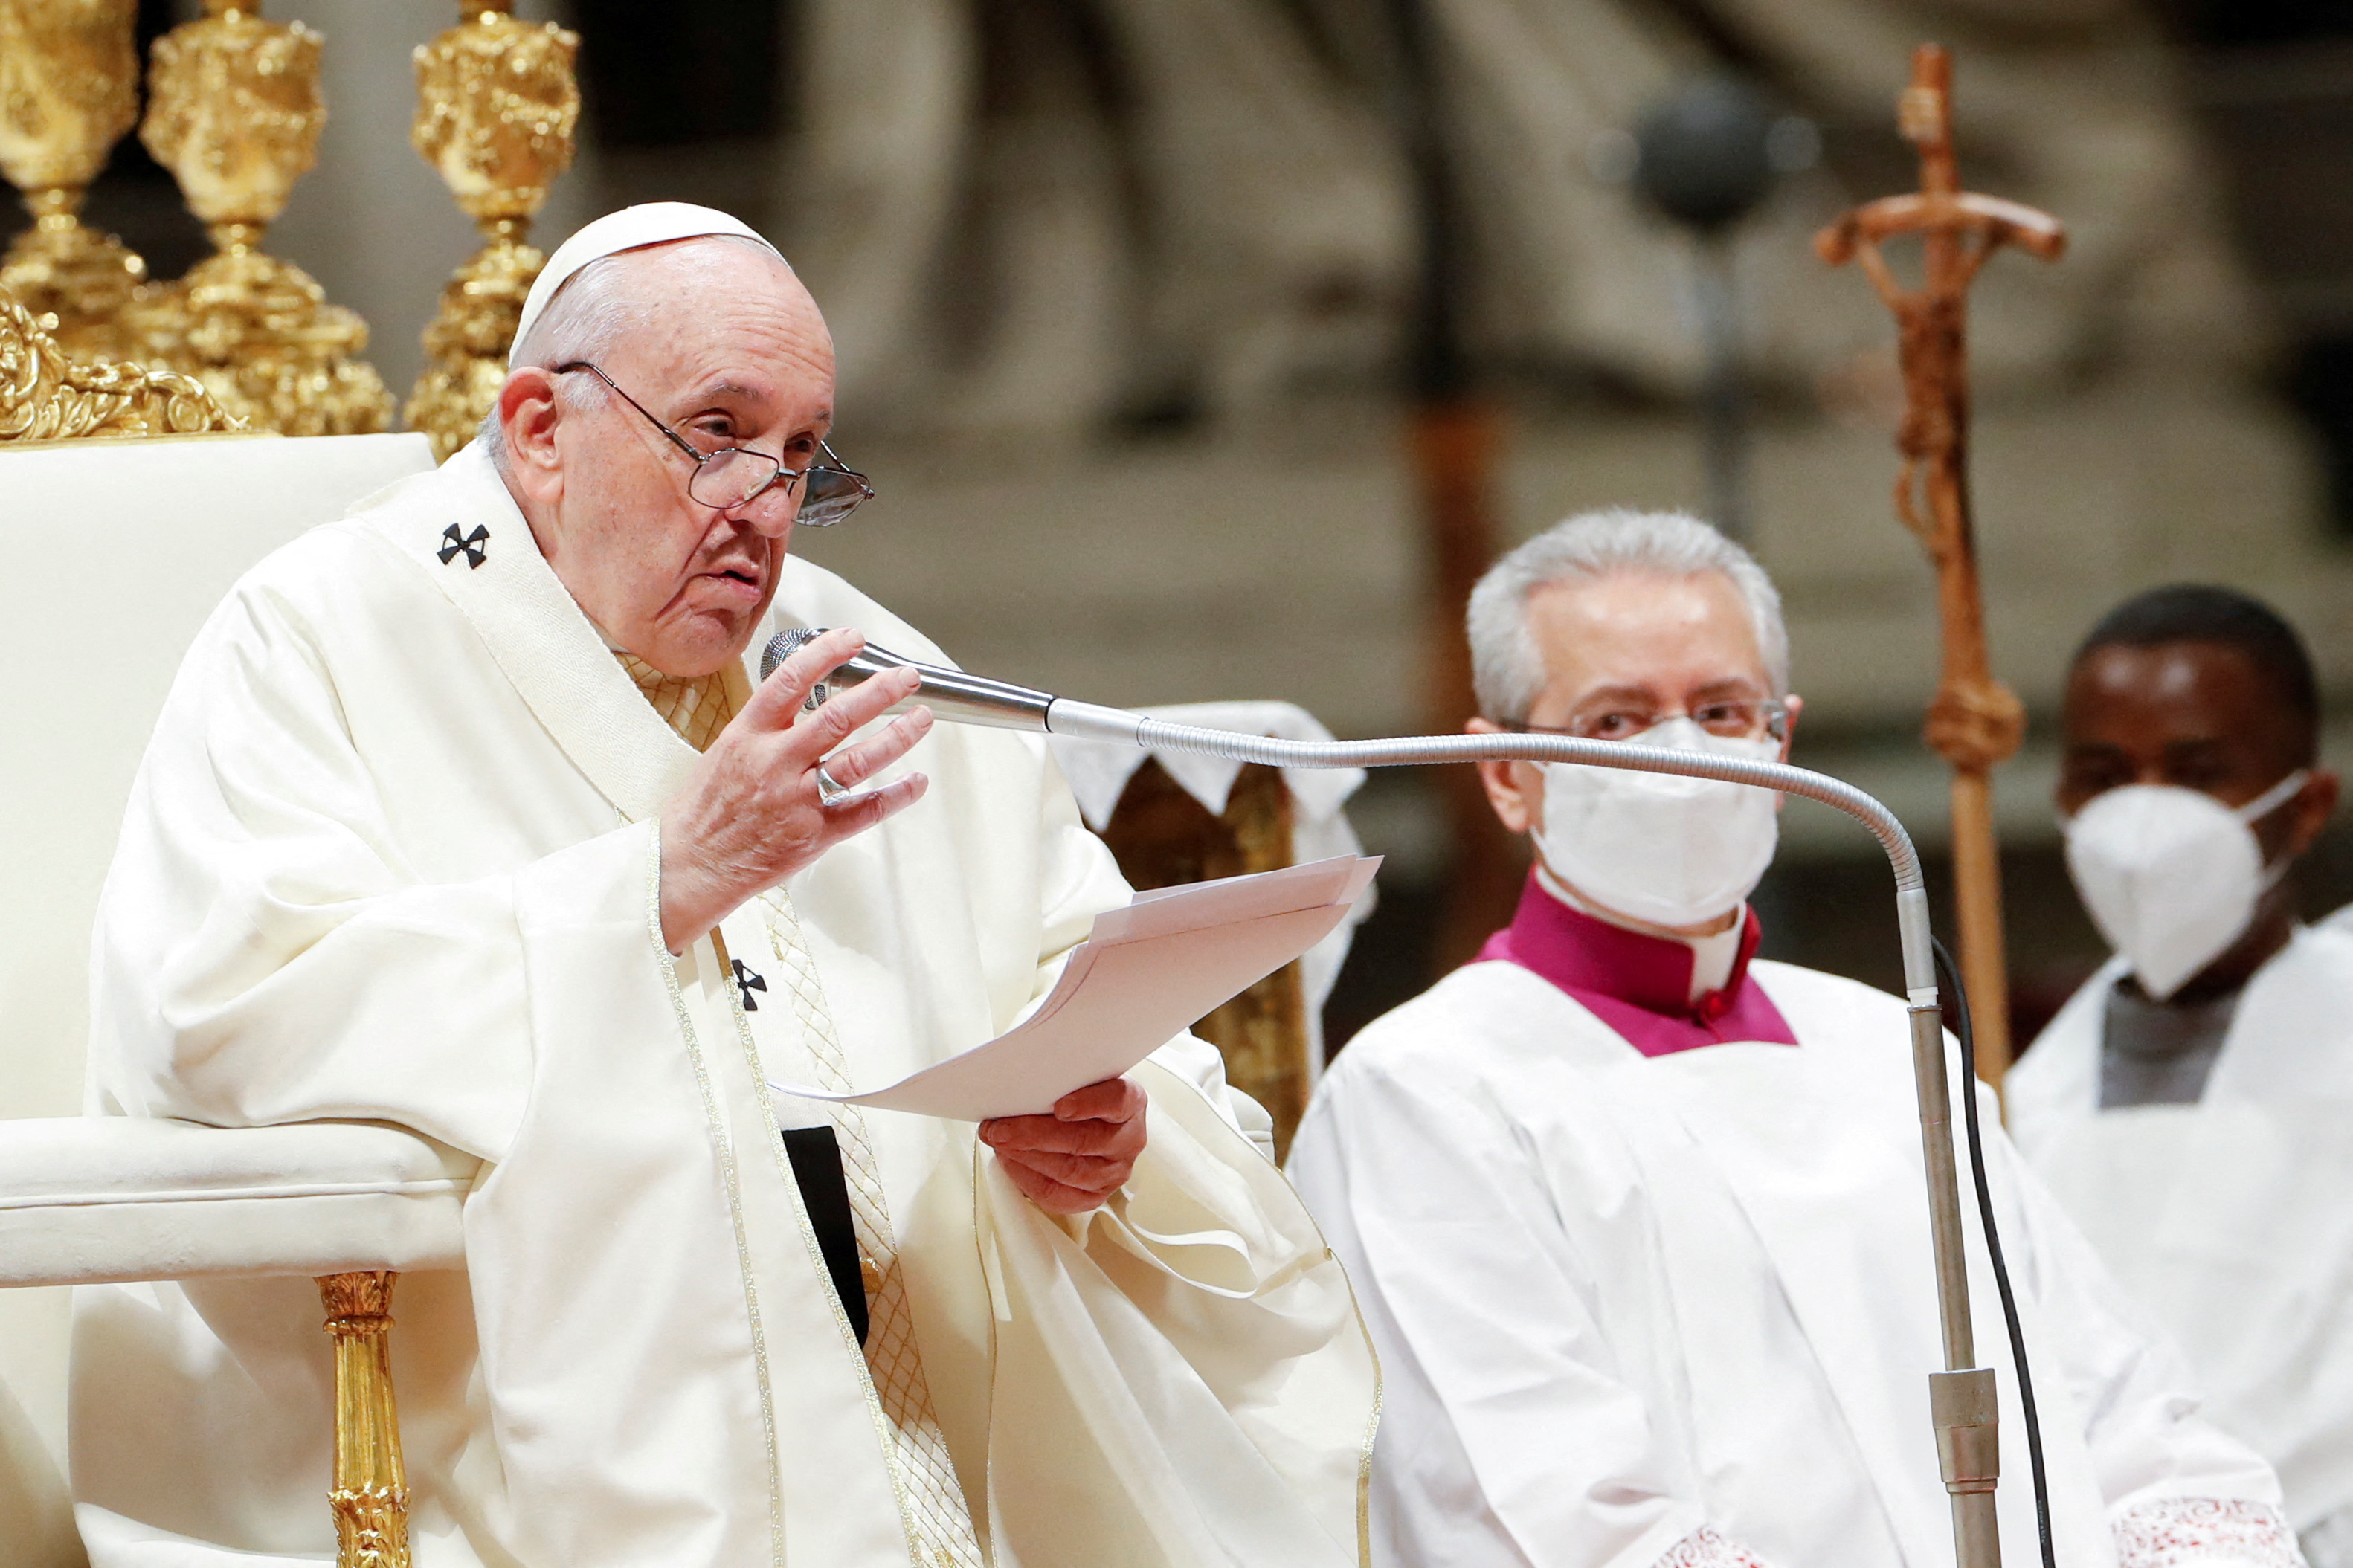 Pope Francis marks World Day for Consecrated Life at the Vatican